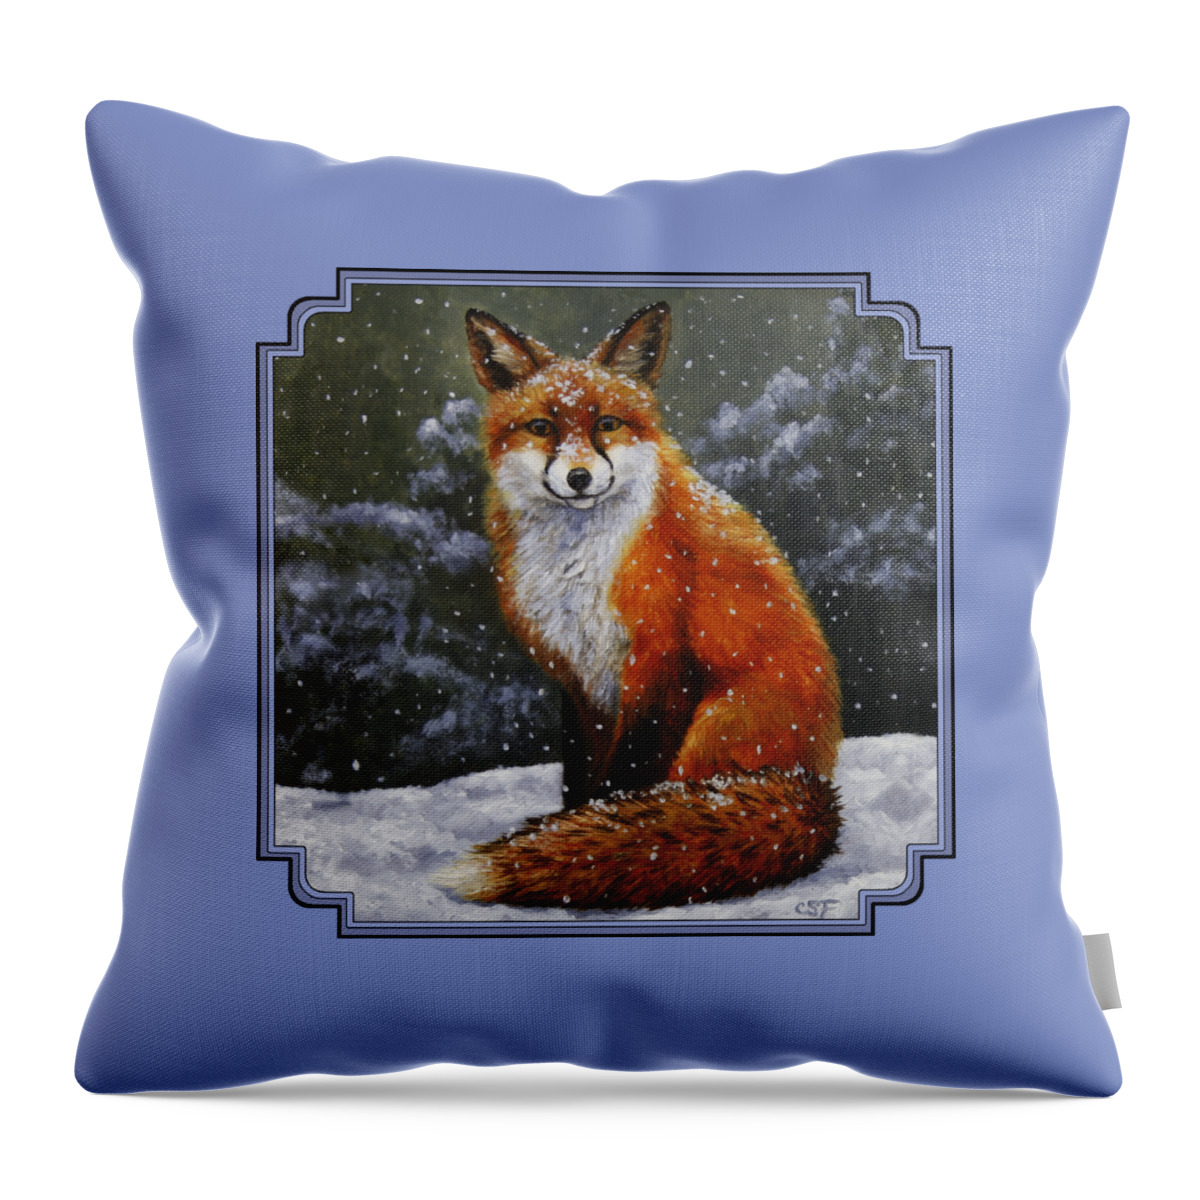 Dog Throw Pillow featuring the painting Snow Fox by Crista Forest